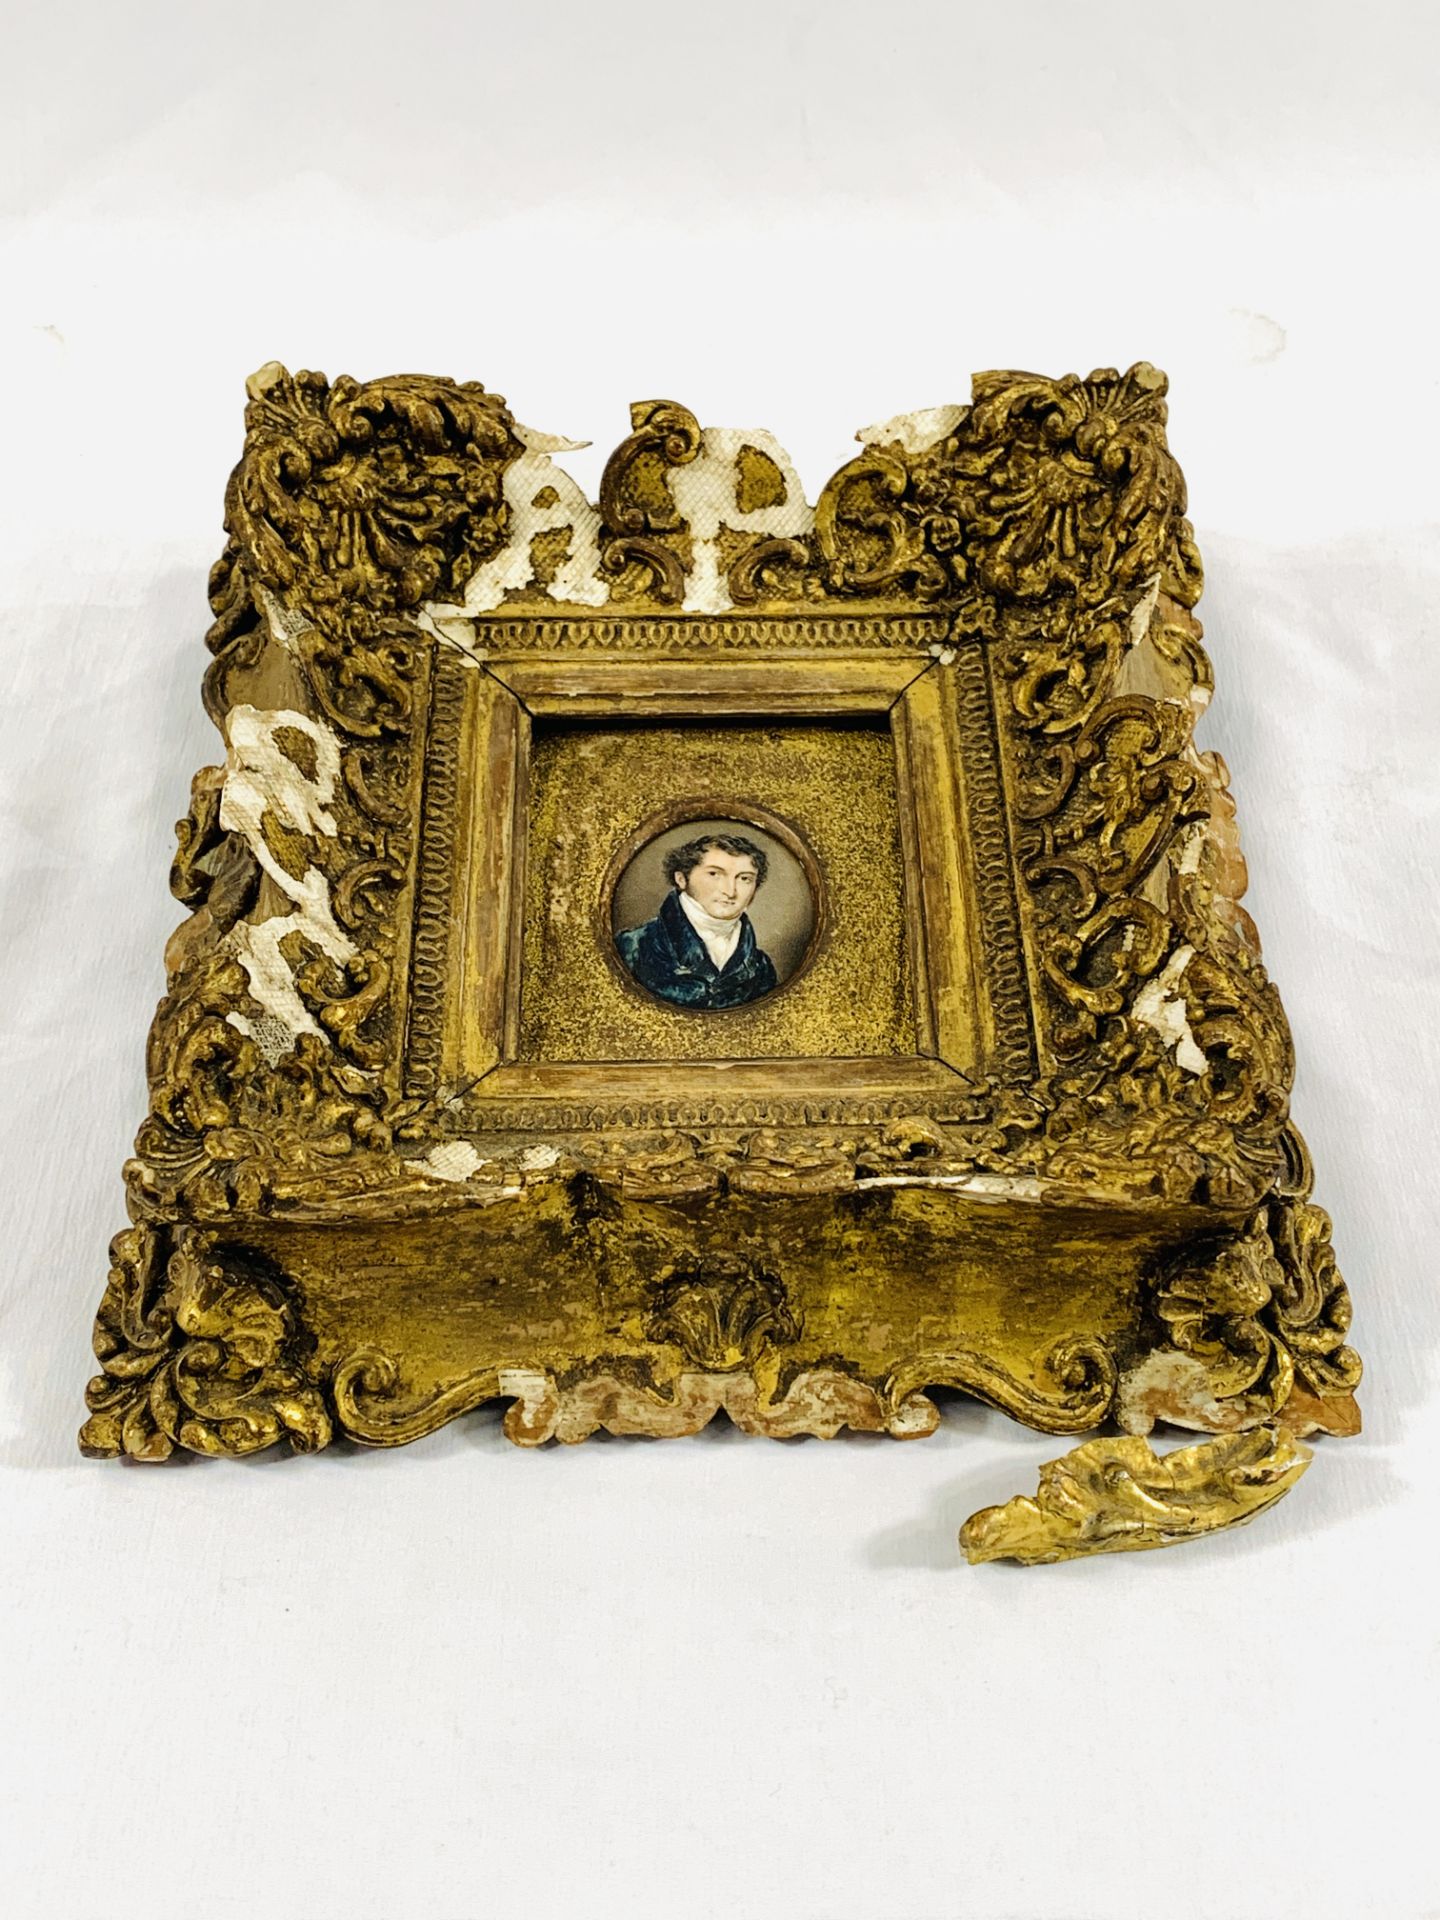 Portrait miniature in a gilt frame - Image 2 of 3